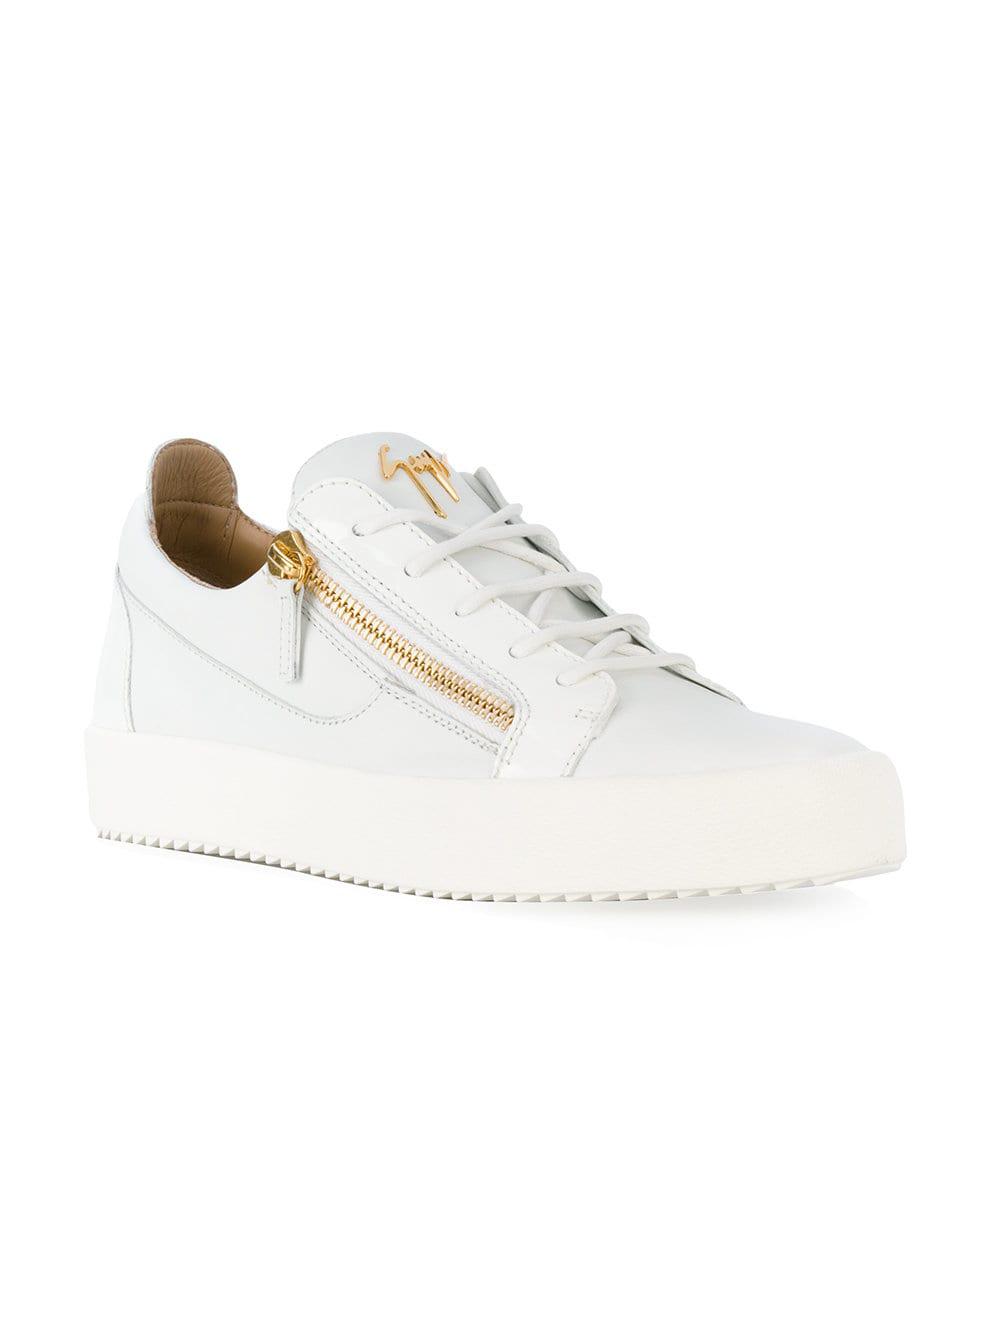 Zanotti Mens White Low-top Leather Trainers for Men - Save 69% - Lyst